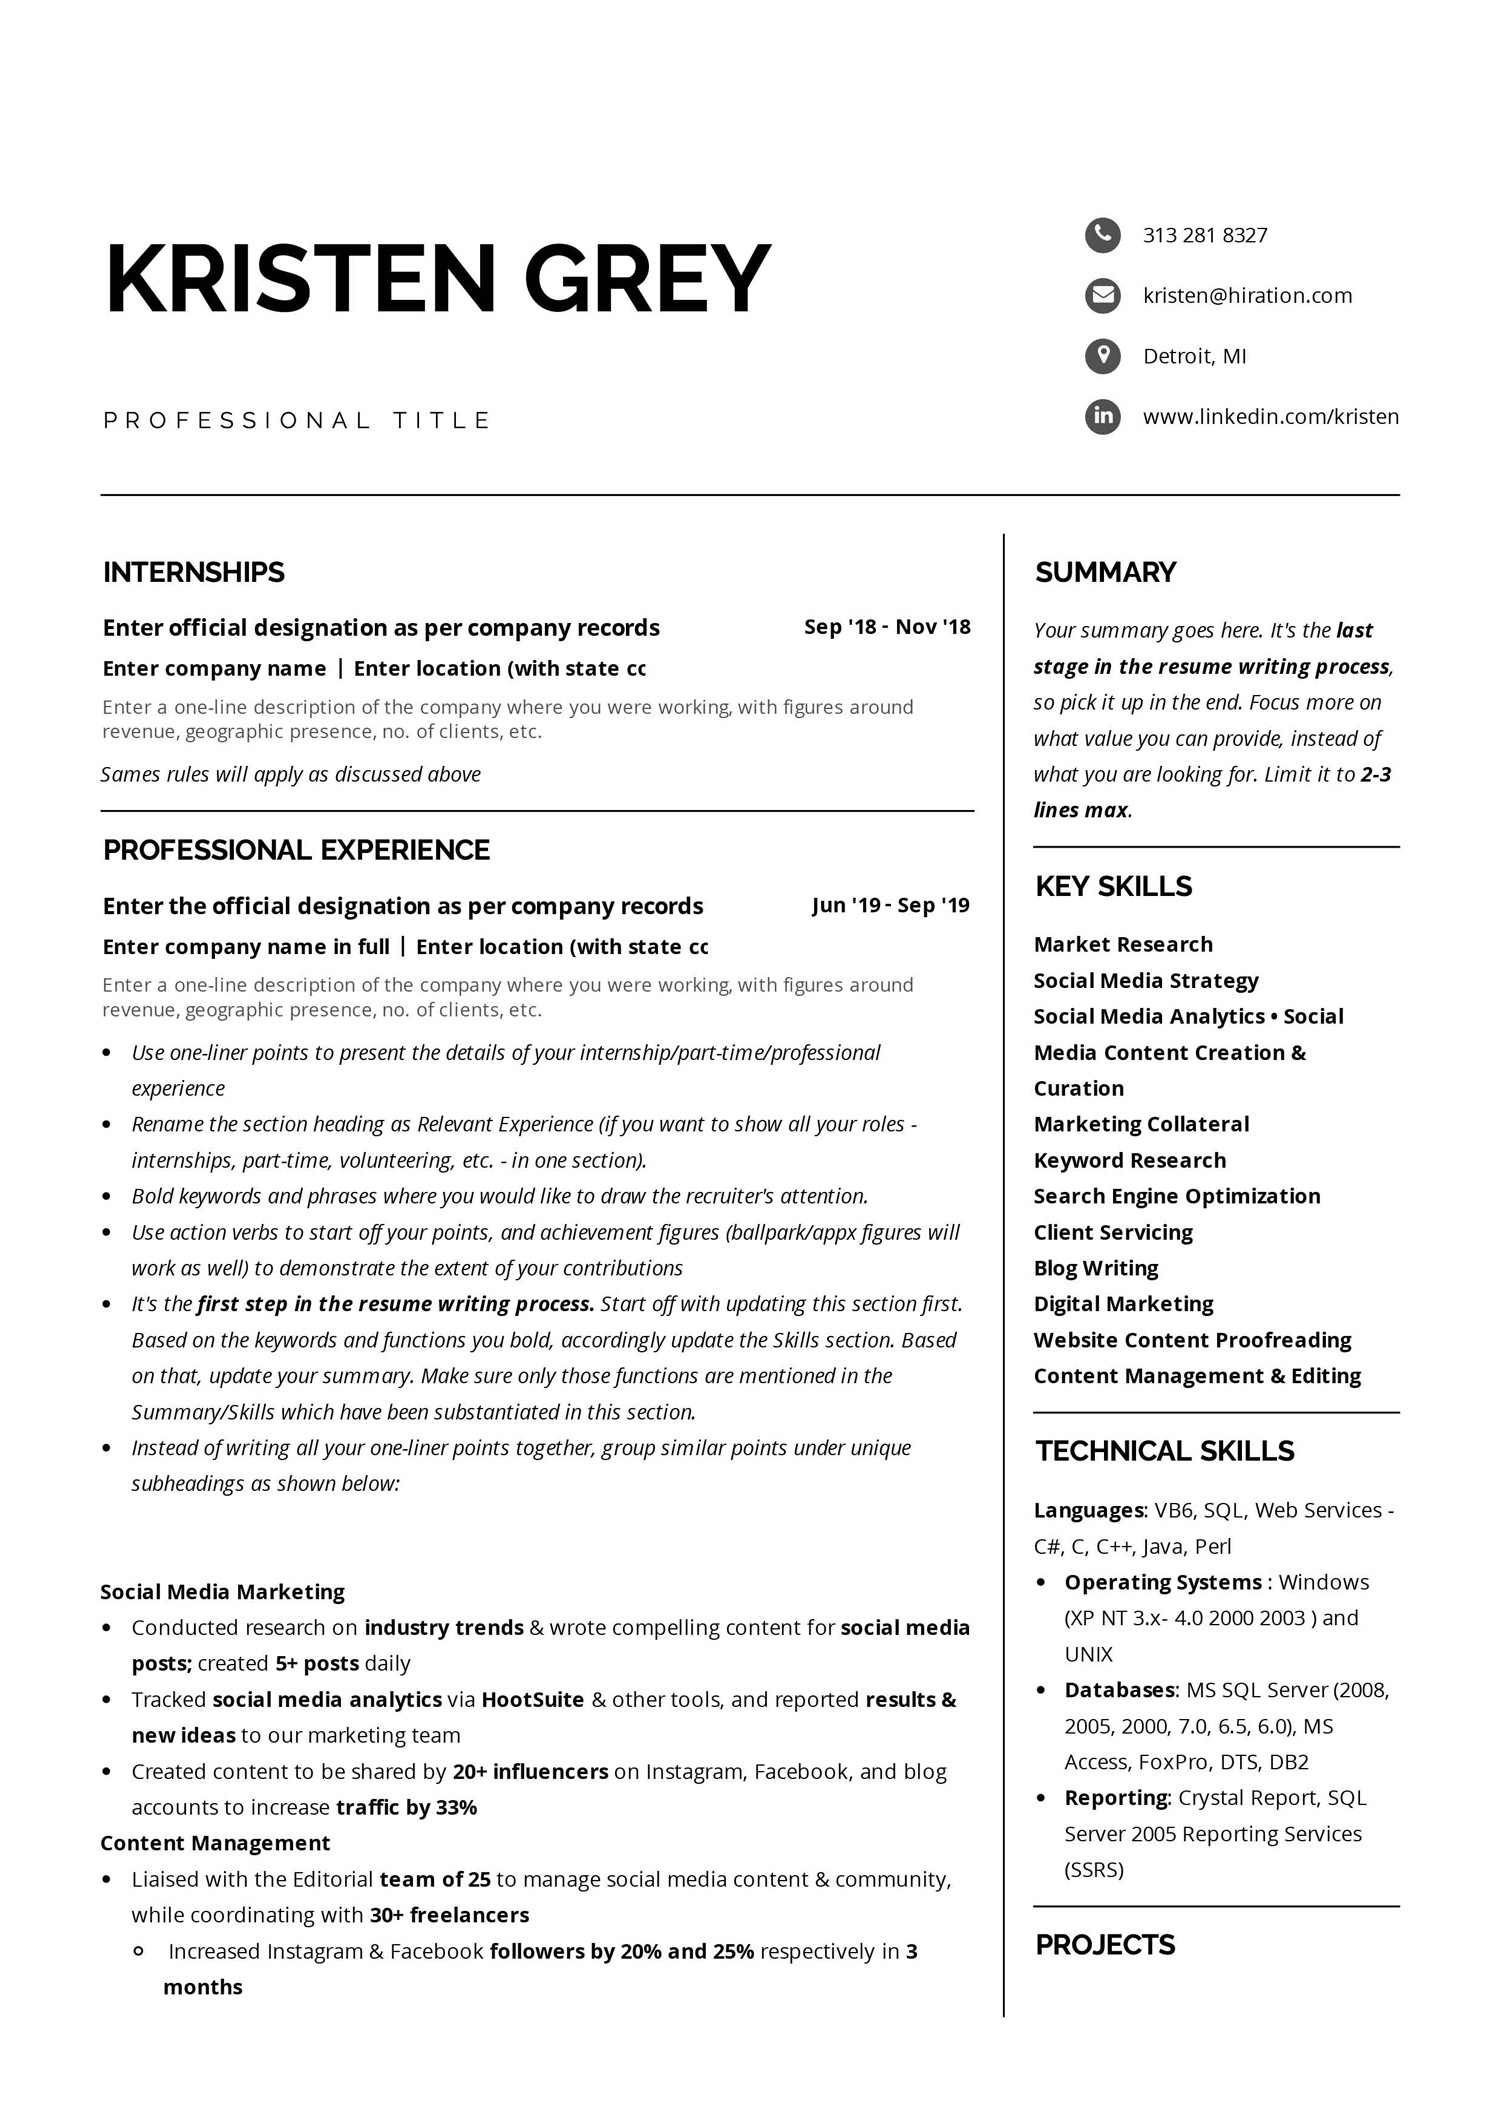 Free Sample Of Resumes for Students Best Free Resume Templates with Examples [2020]